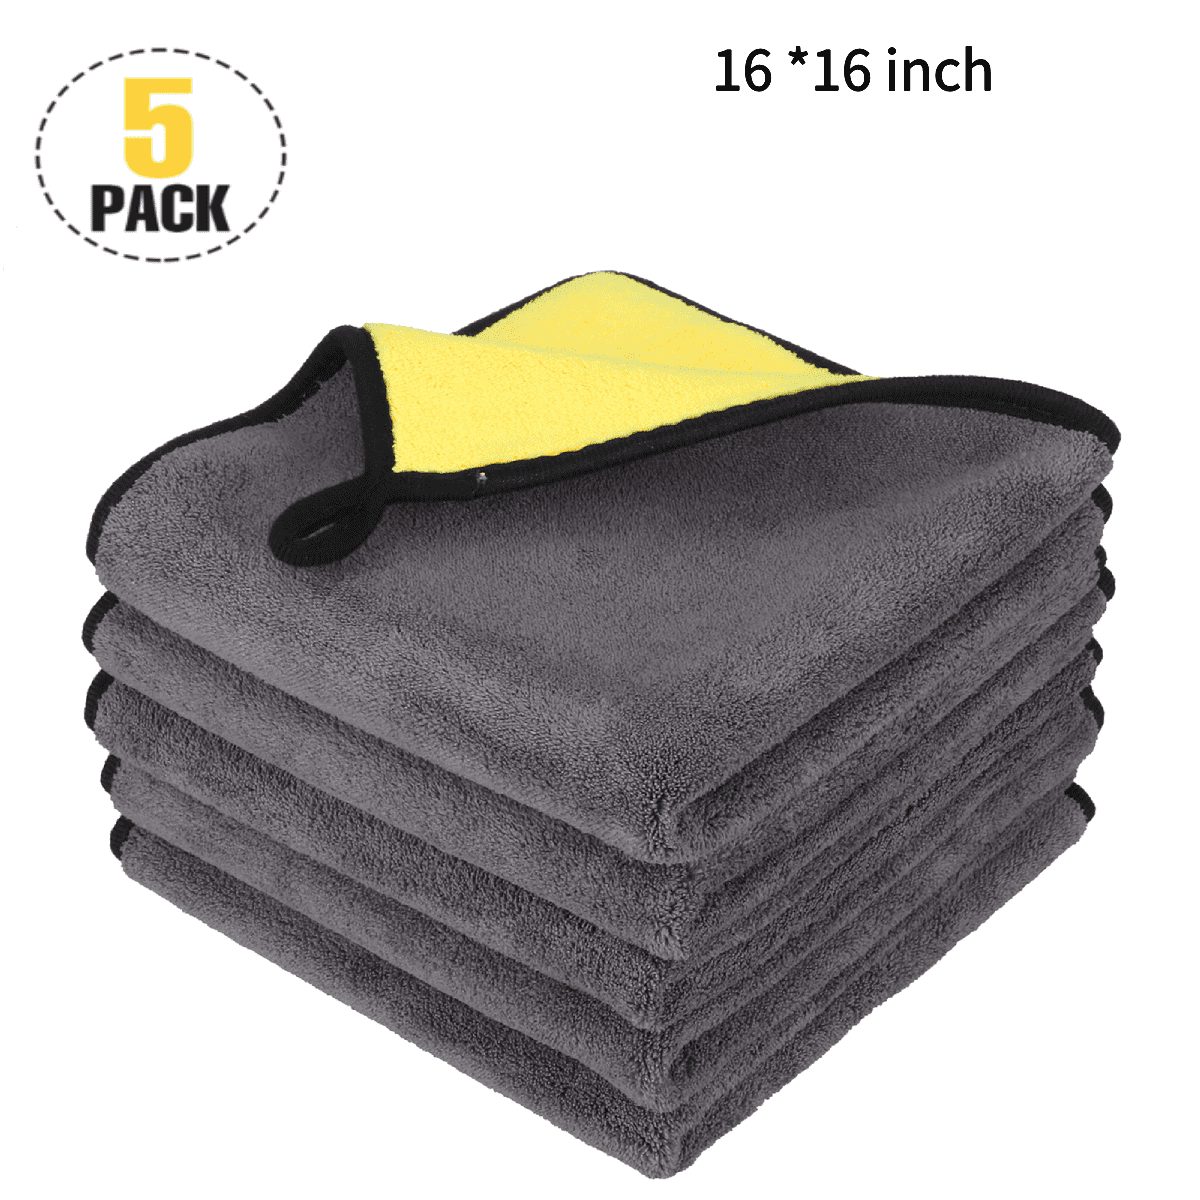 Car Microfiber Glass Cleaning Cloth Towel 16”x16” Car Window Windshield Cleaning Cloth Wash Detailing Towel Double-Purposed Sides Lint & Streak Free Quick Clean for Window Chrome Mirror LCD Screen